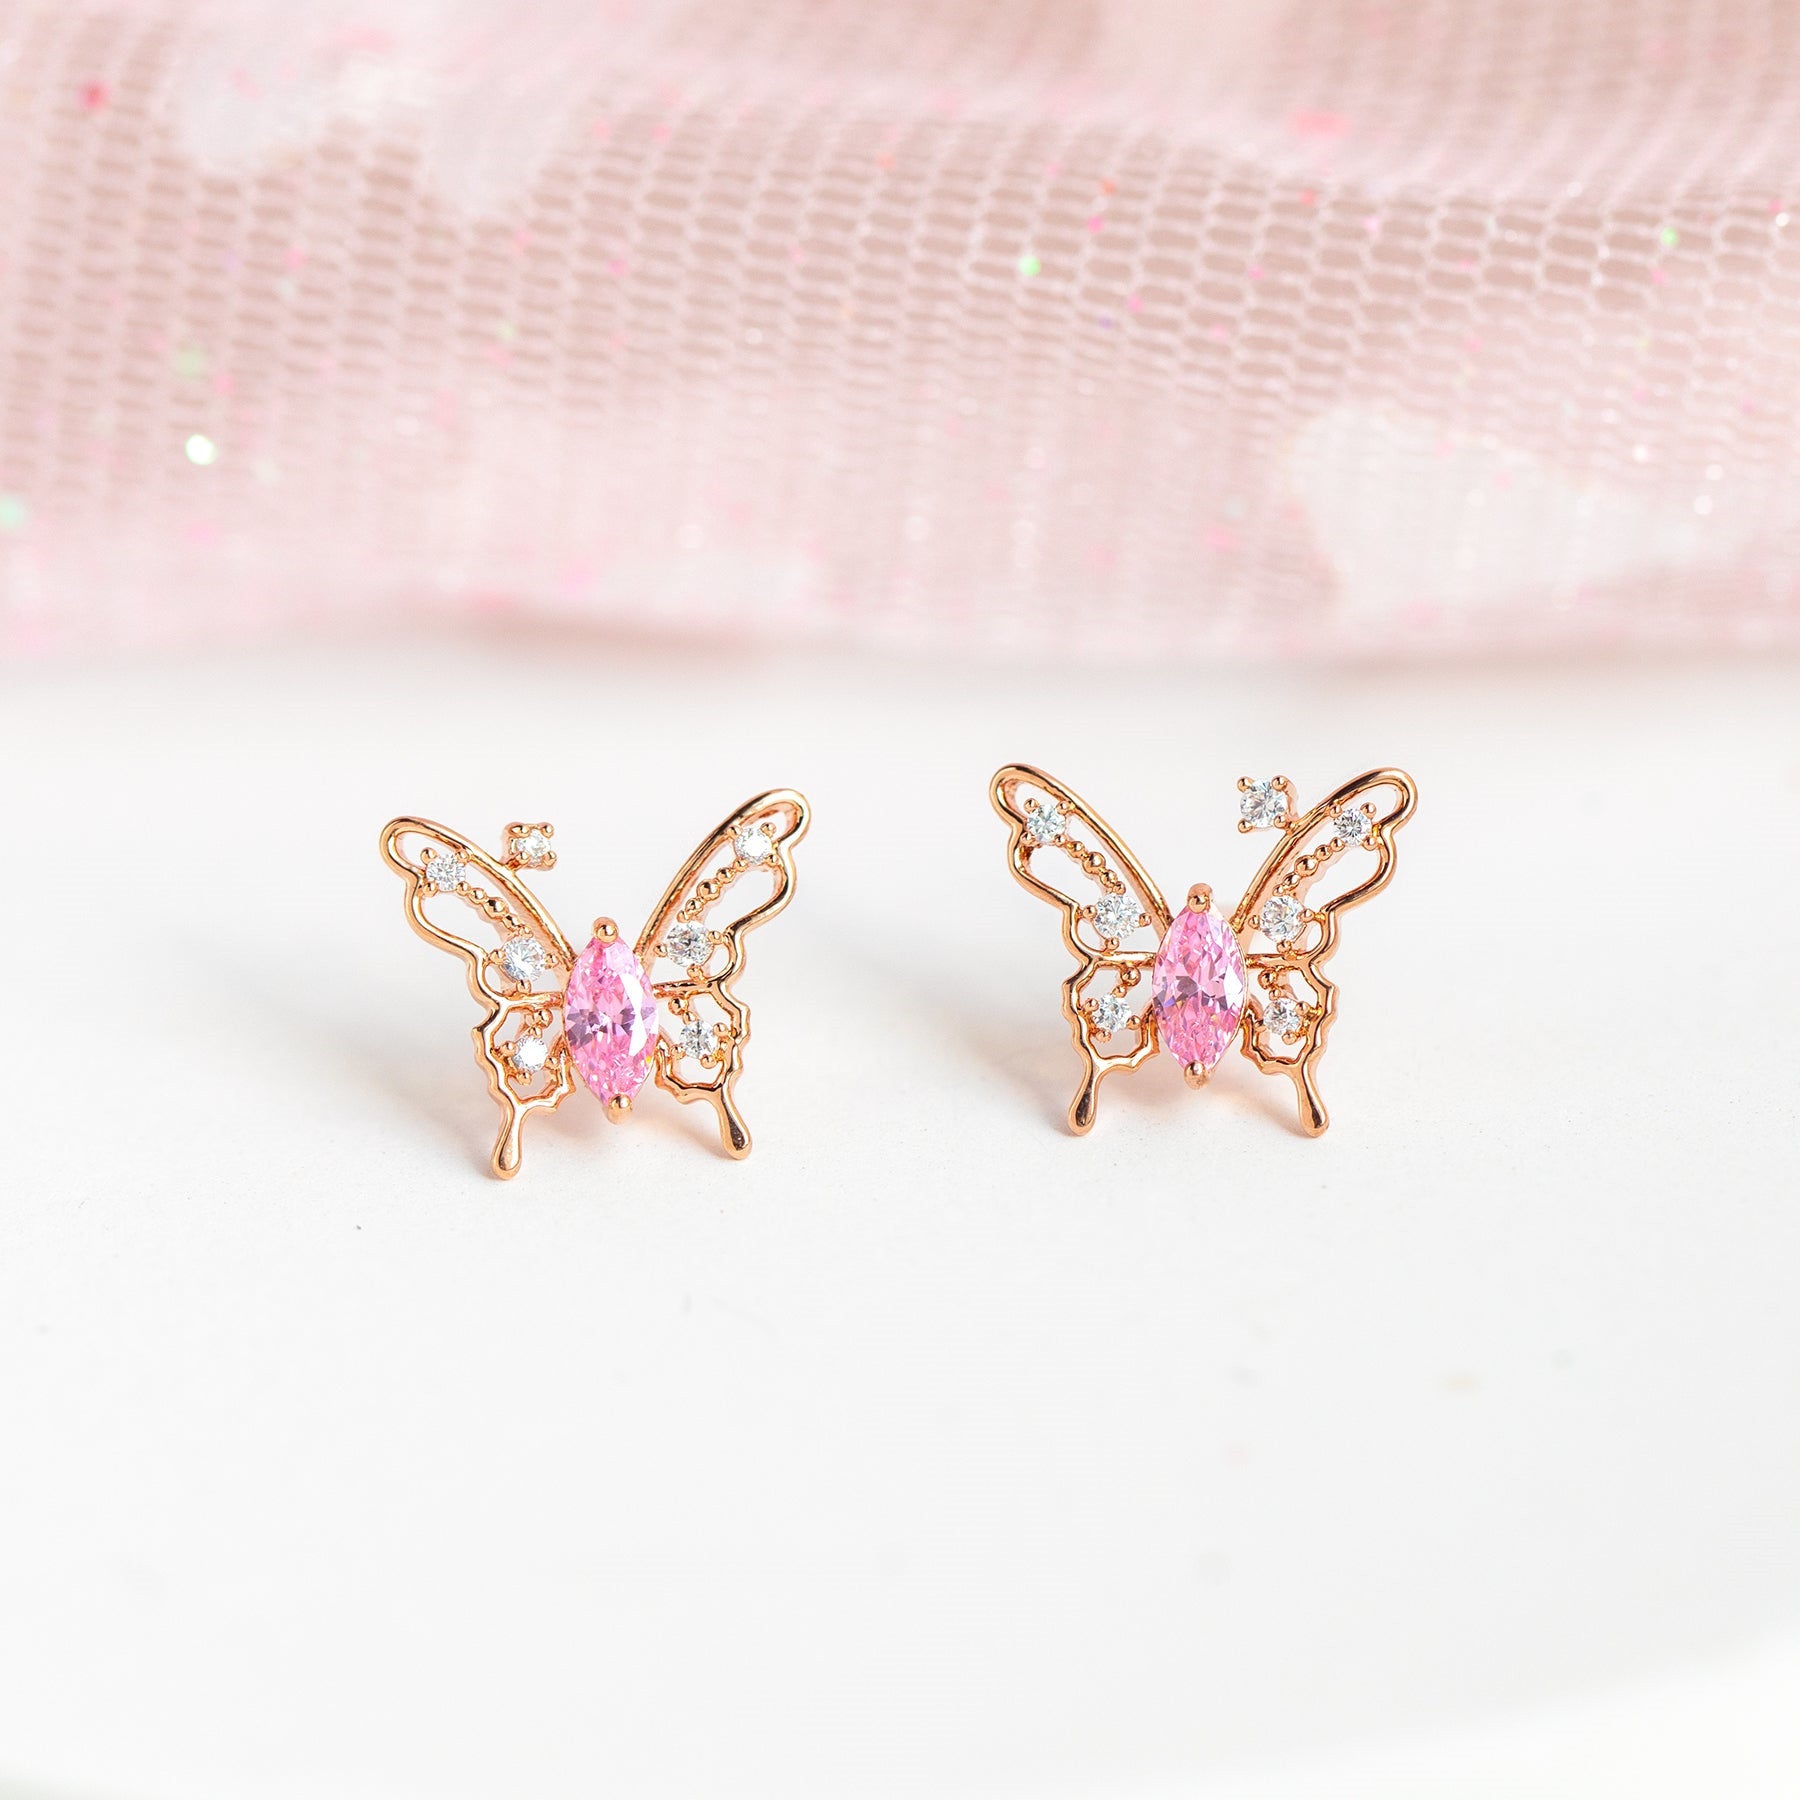 A pair of Micro Inlaid Zircon Silver Stud Earrings by Maramalive™ on a white background.